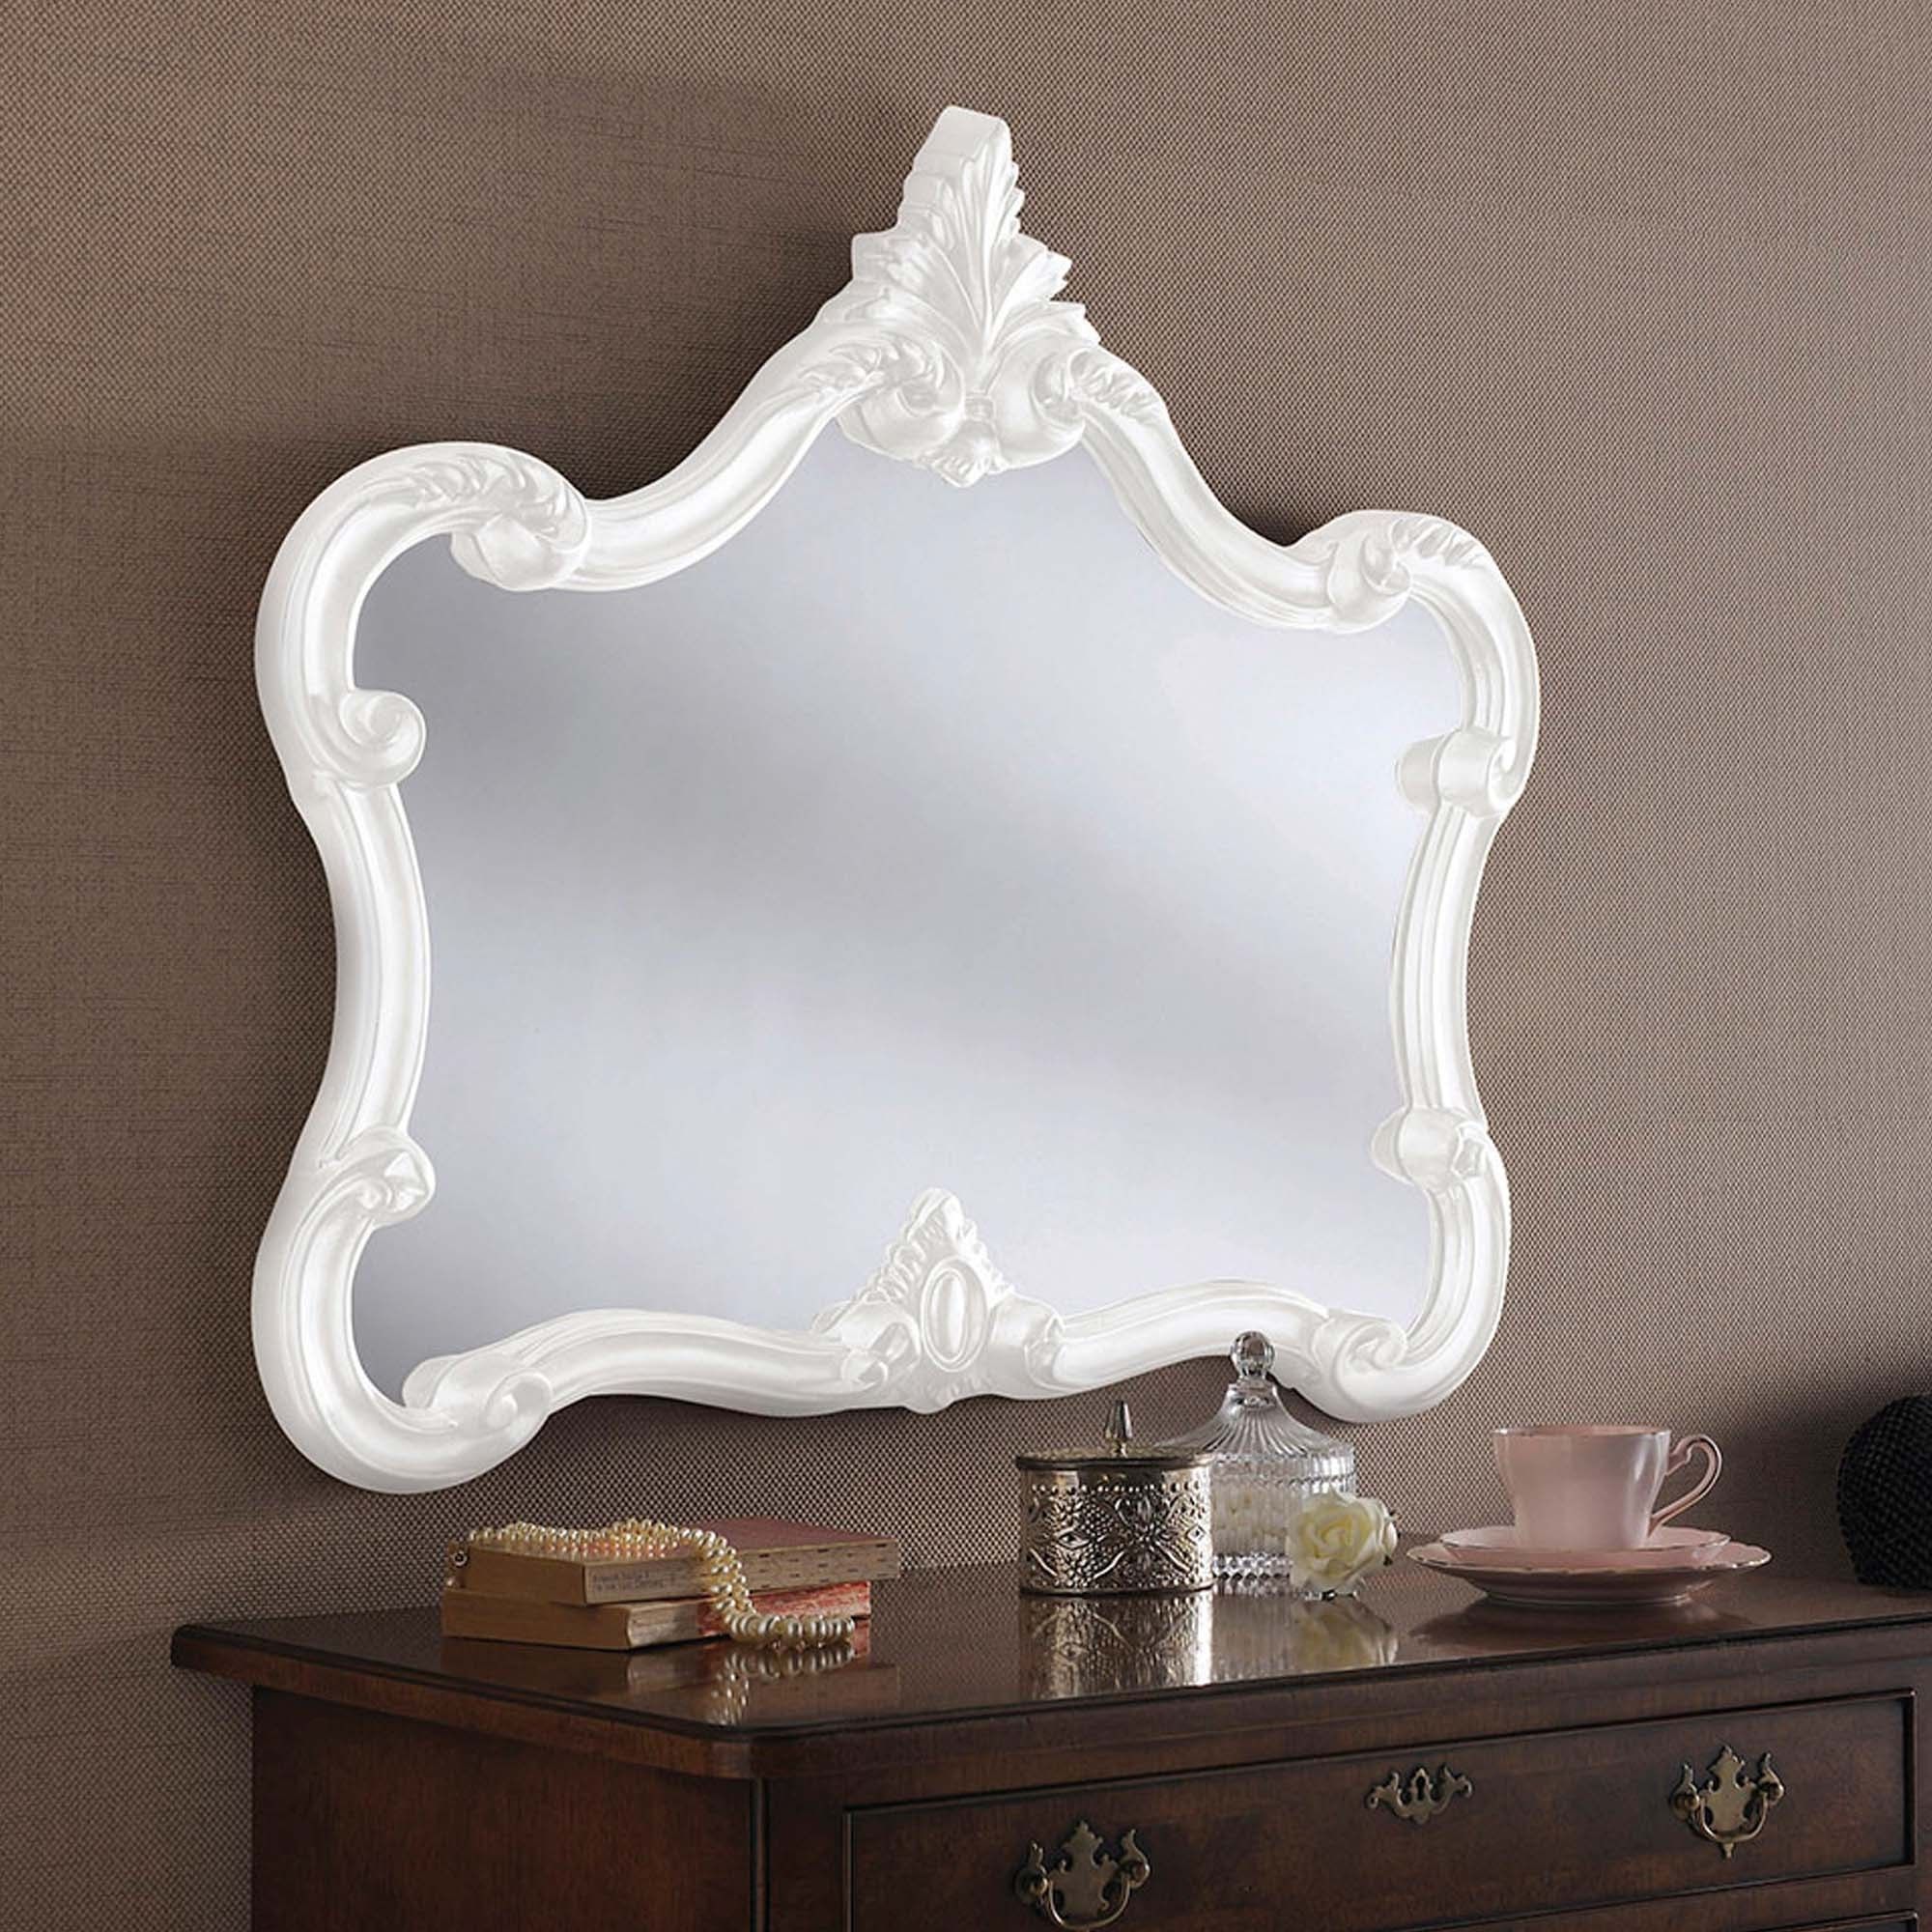 Antique French Style White Ornate Wall Mirror | Wall Mirrors Within White Wall Mirrors (View 9 of 15)